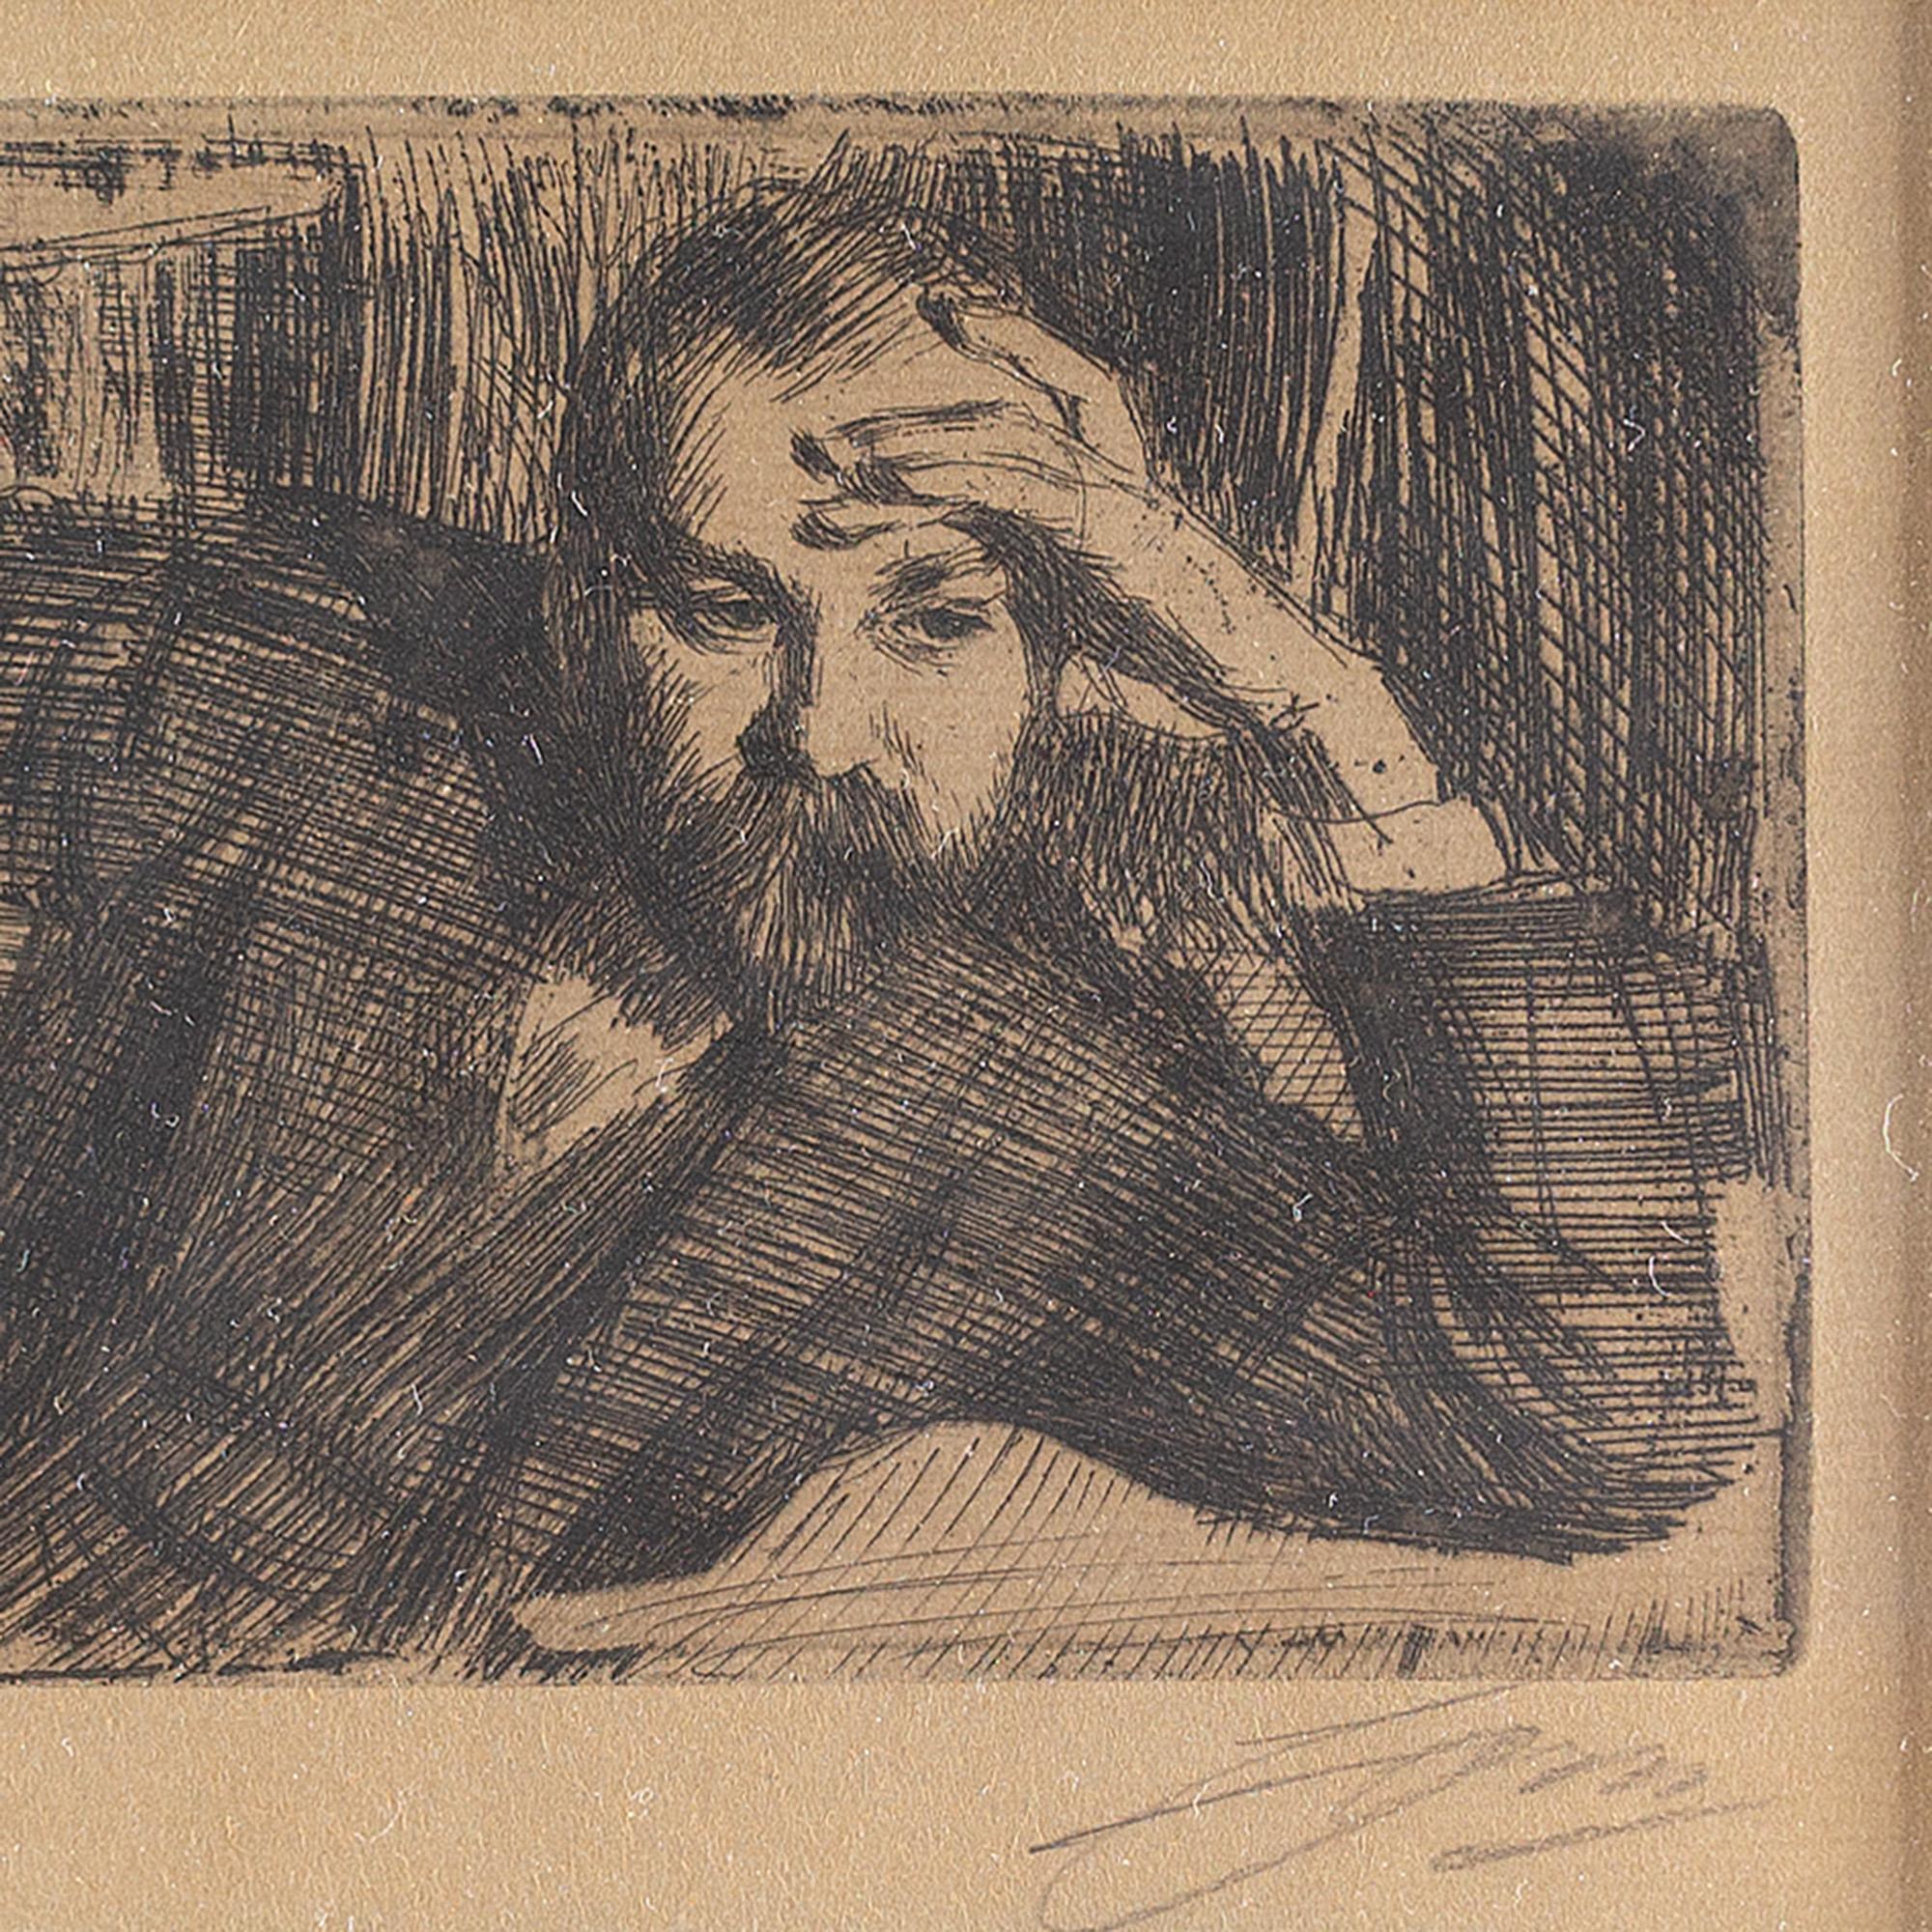 A fine early 20th-century original signed etching by Swedish artist, Anders Zorn (1860-1920) depicting Fredrik Martin. Zorn is considered to be one of Sweden’s greatest artists and, today, his works are held in many of the world’s leading public